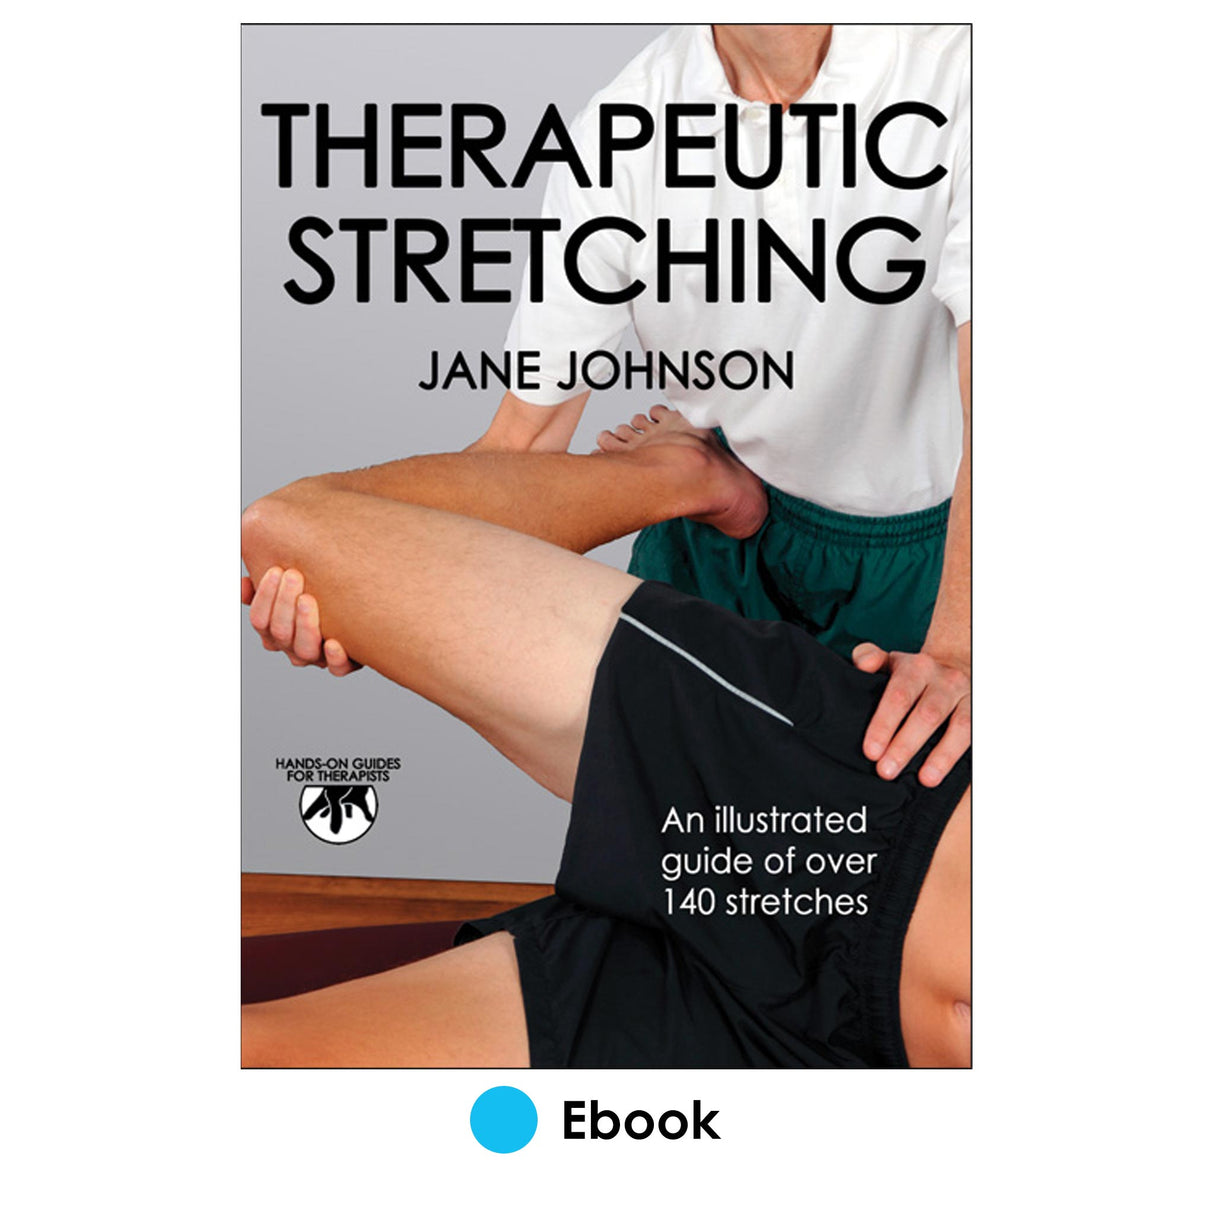 Therapeutic Stretching PDF